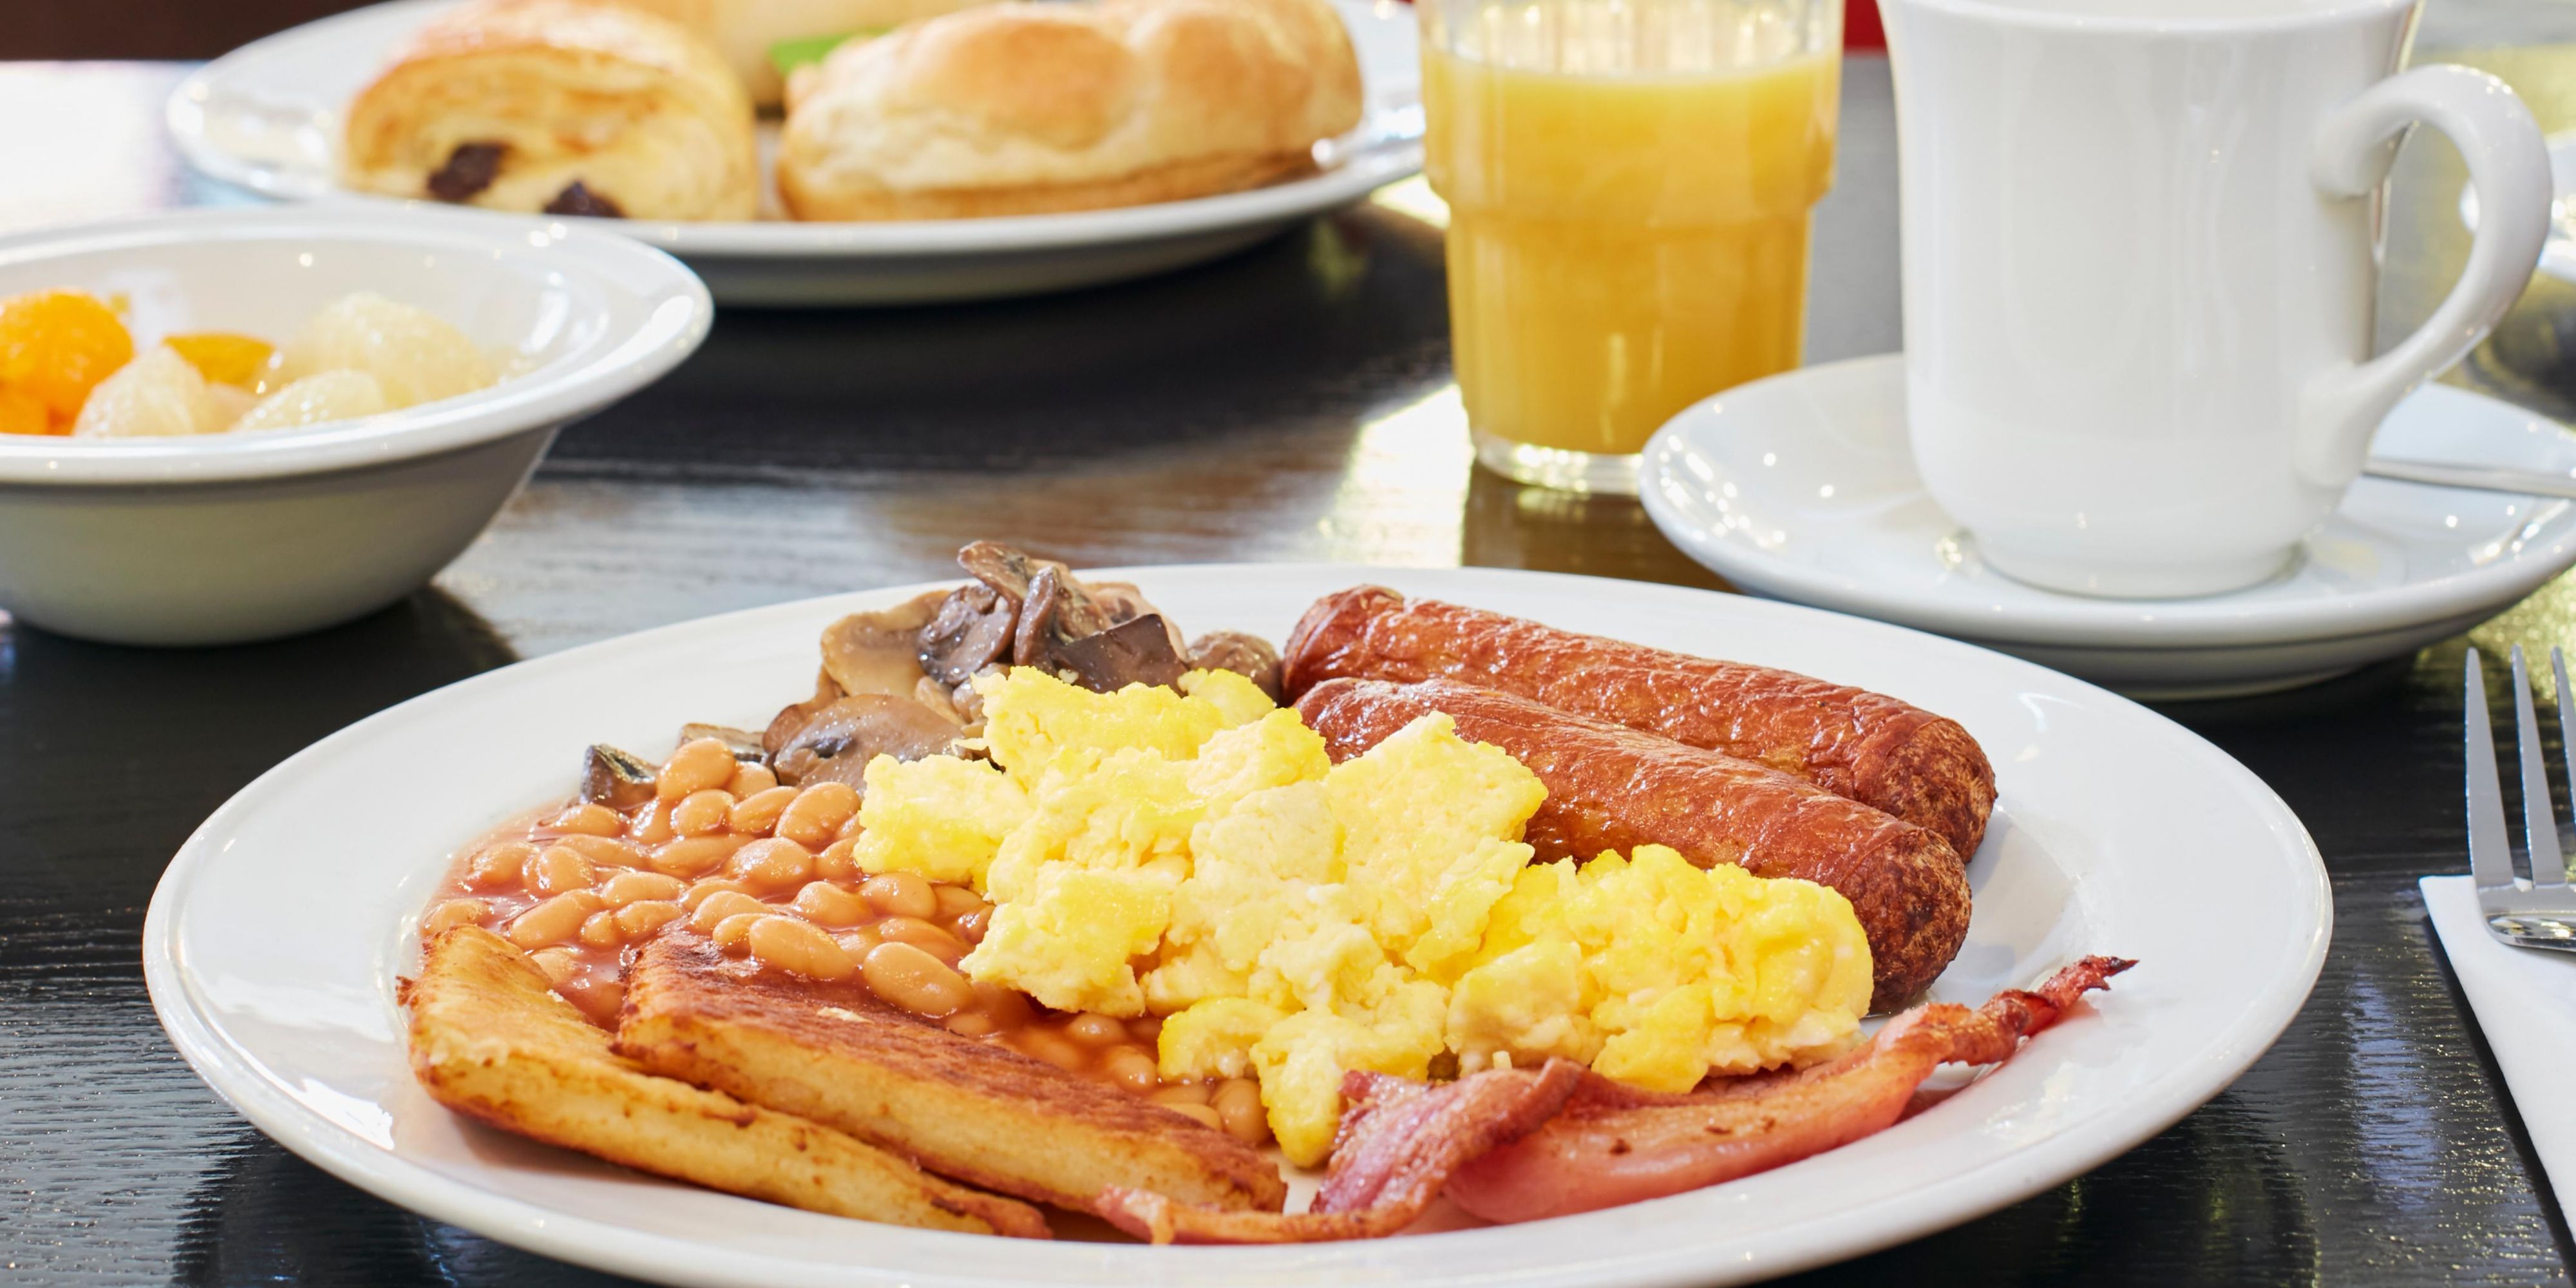 When you book Holiday Inn Express Belfast, your room rate includes breakfast for every guest. So you can fuel up for the day. With all of your must-have favourites including sausages, scrambled eggs, and bacon. Fully cooked for you to kick start your morning.